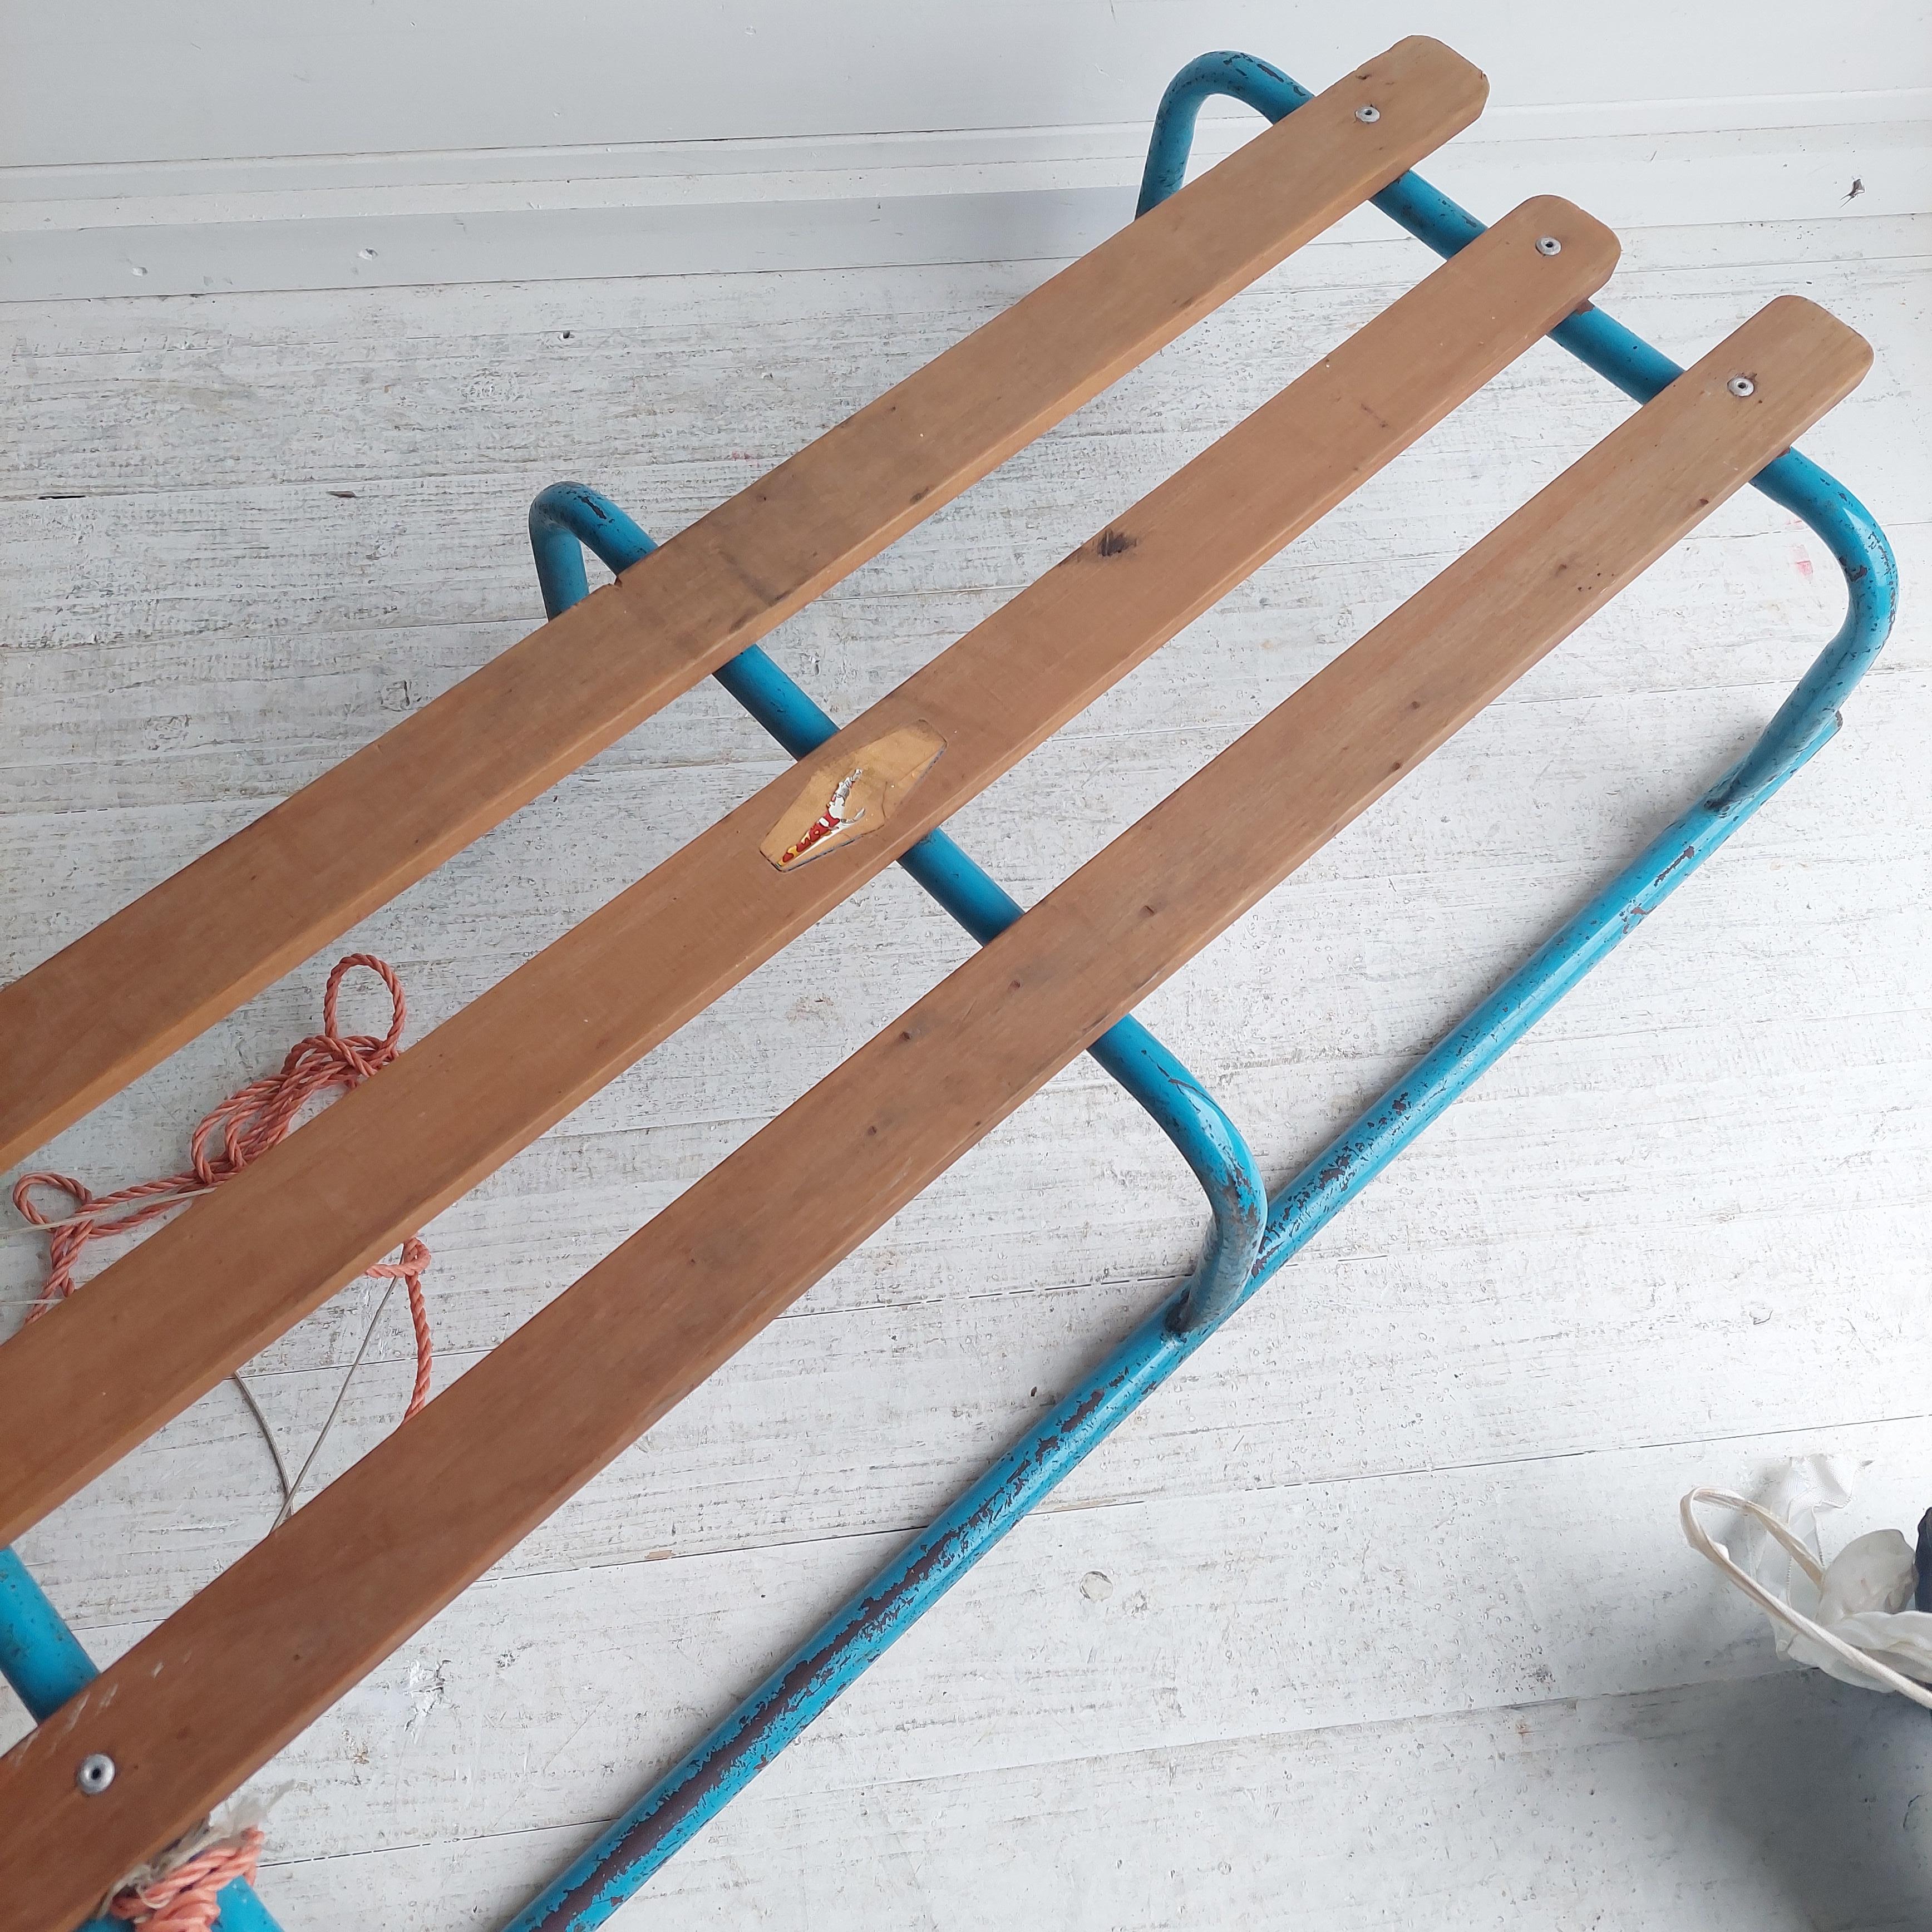 Vintage Retro  Metal & Wooden Slatted Play Way Sledge, 60 For Sale 7